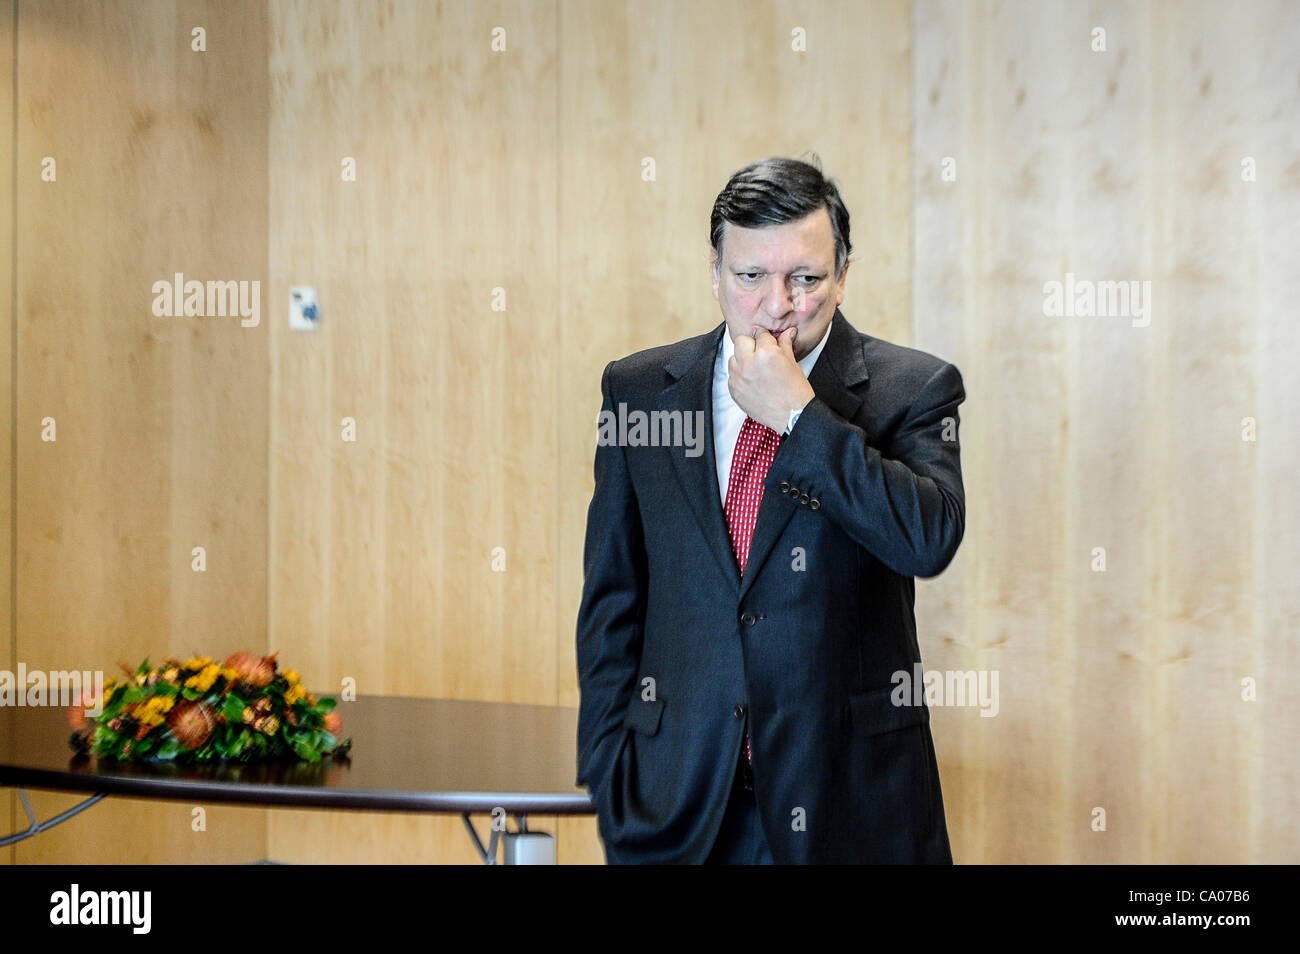 March 12, 2012 - Brussels, Bxl, Belgium - Jose Manuel Barroso, the president of the European Commission   during the meeting  at European Commision headquarters in  Brussels, Belgium on 12.03.2012 (Credit Image: © Wiktor Dabkowski/ZUMAPRESS.com) Stock Photo